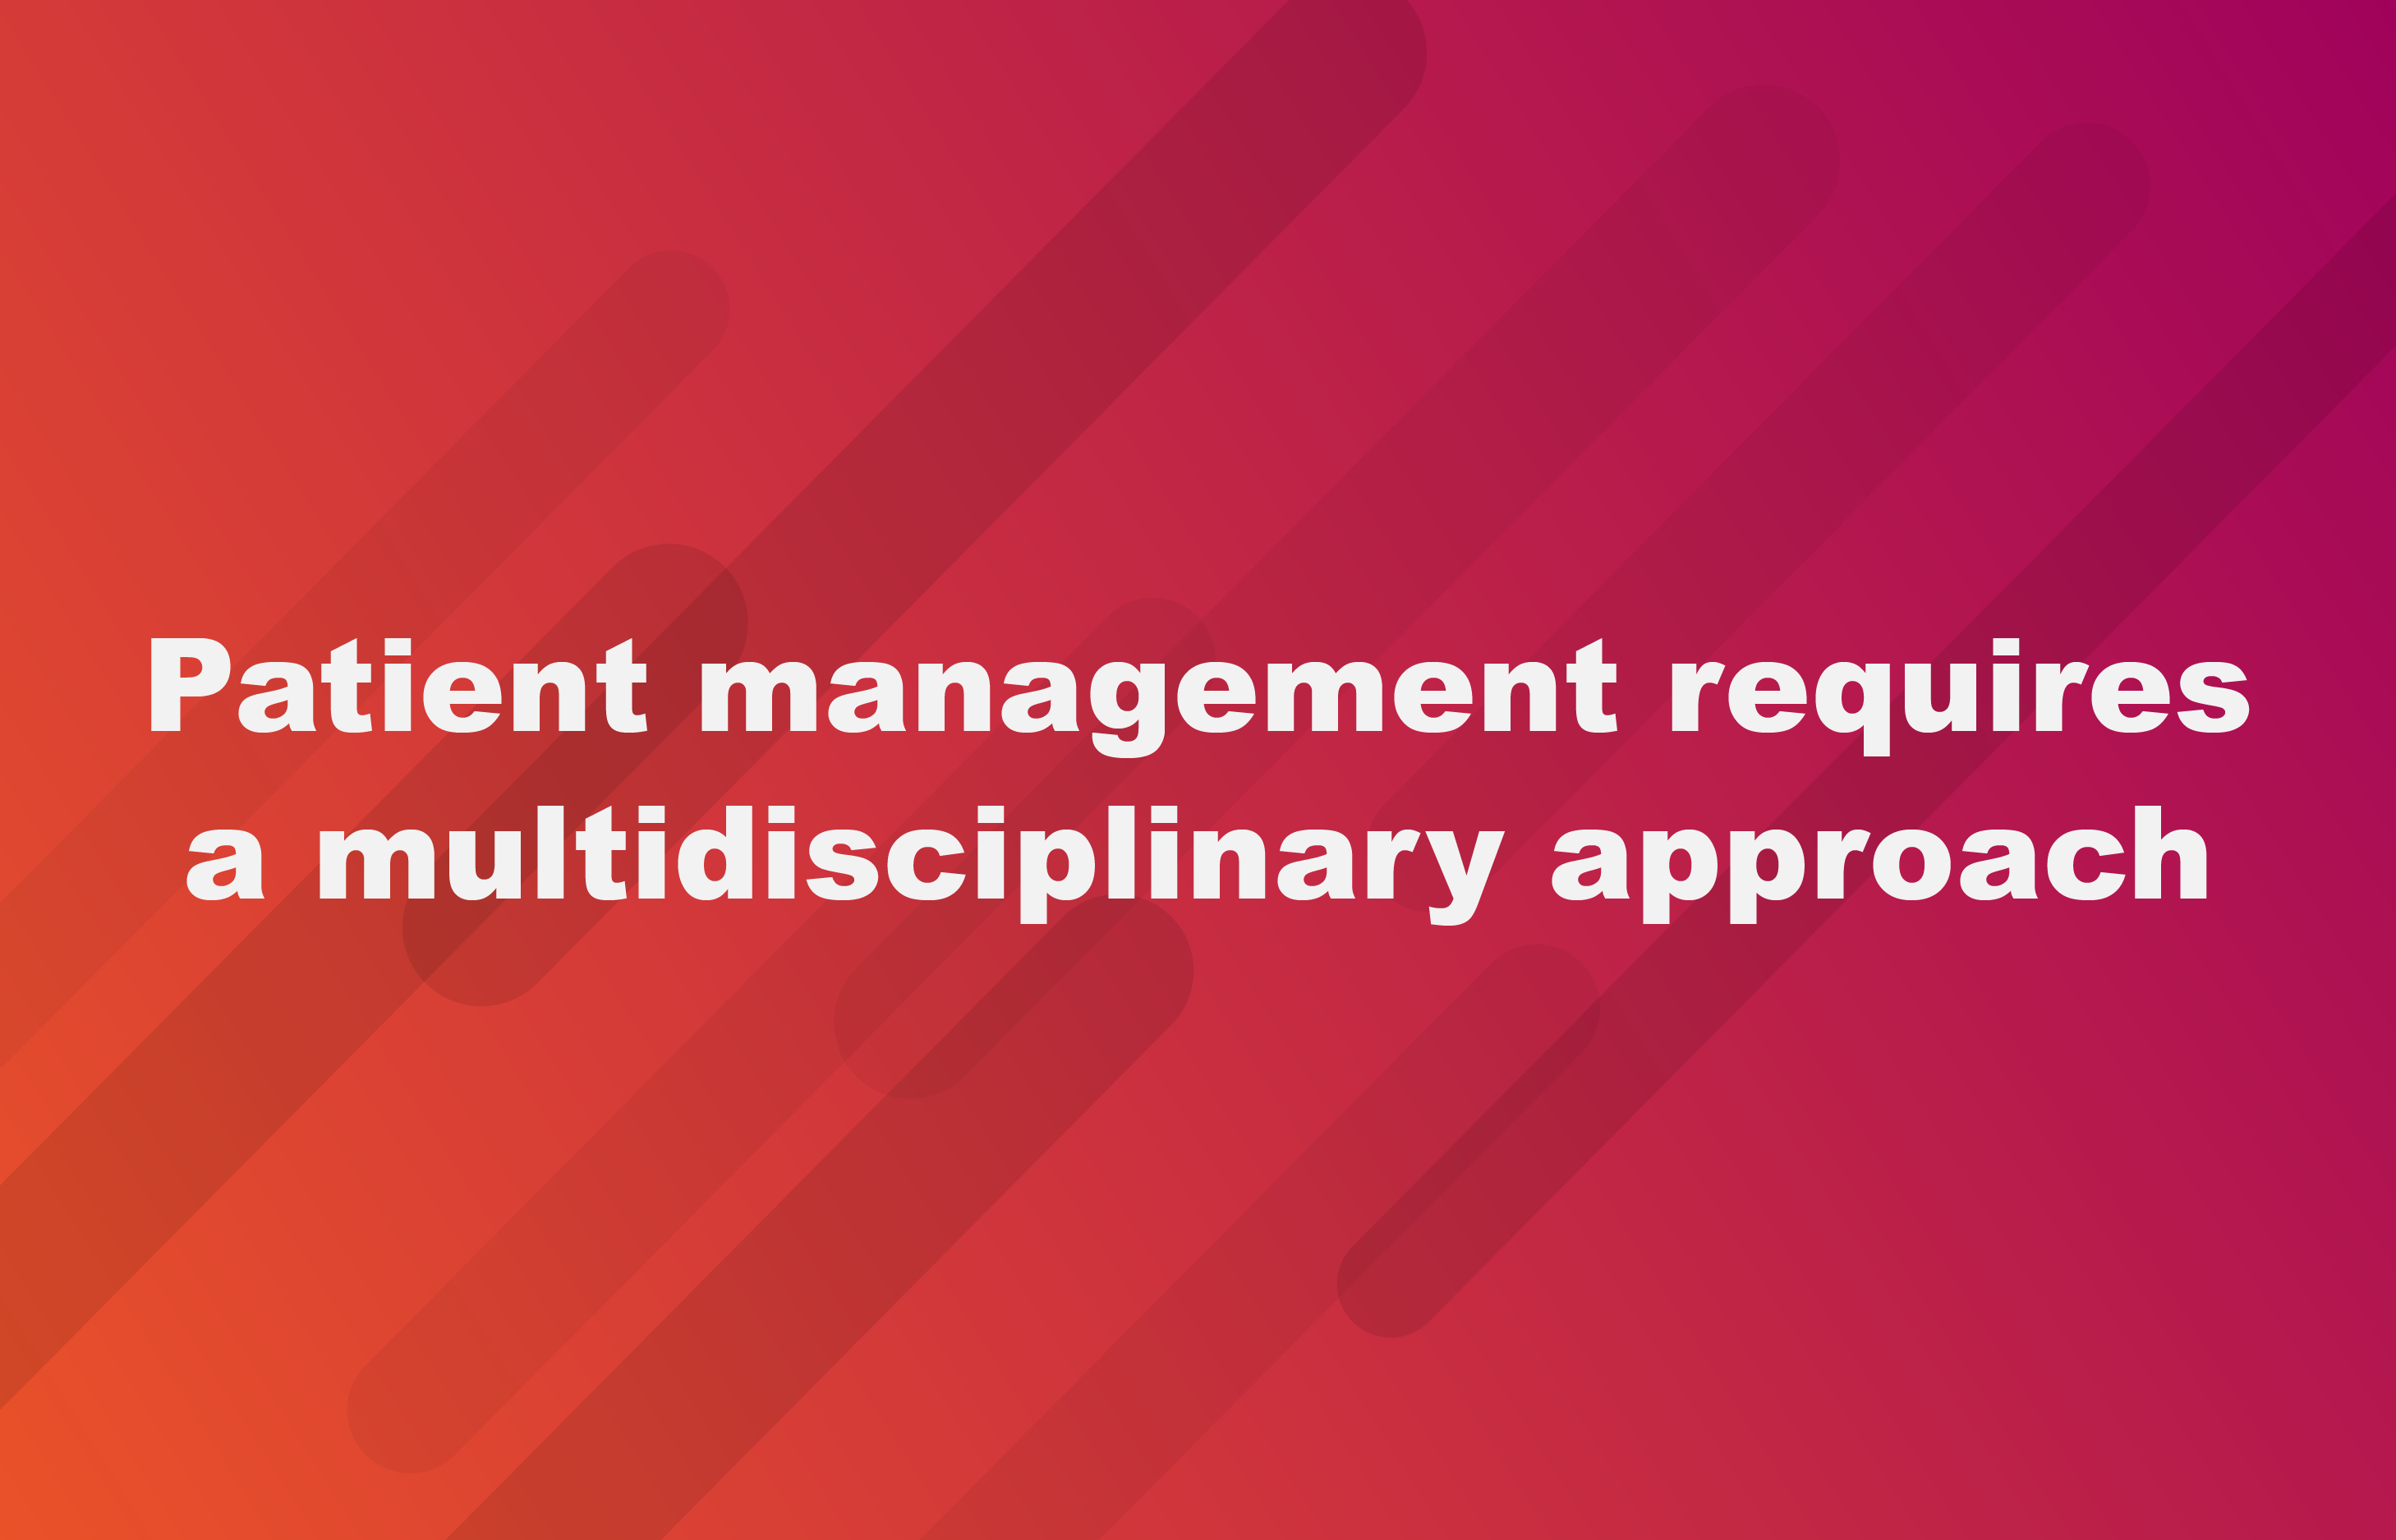 Patient management requires a multidisciplinary approach